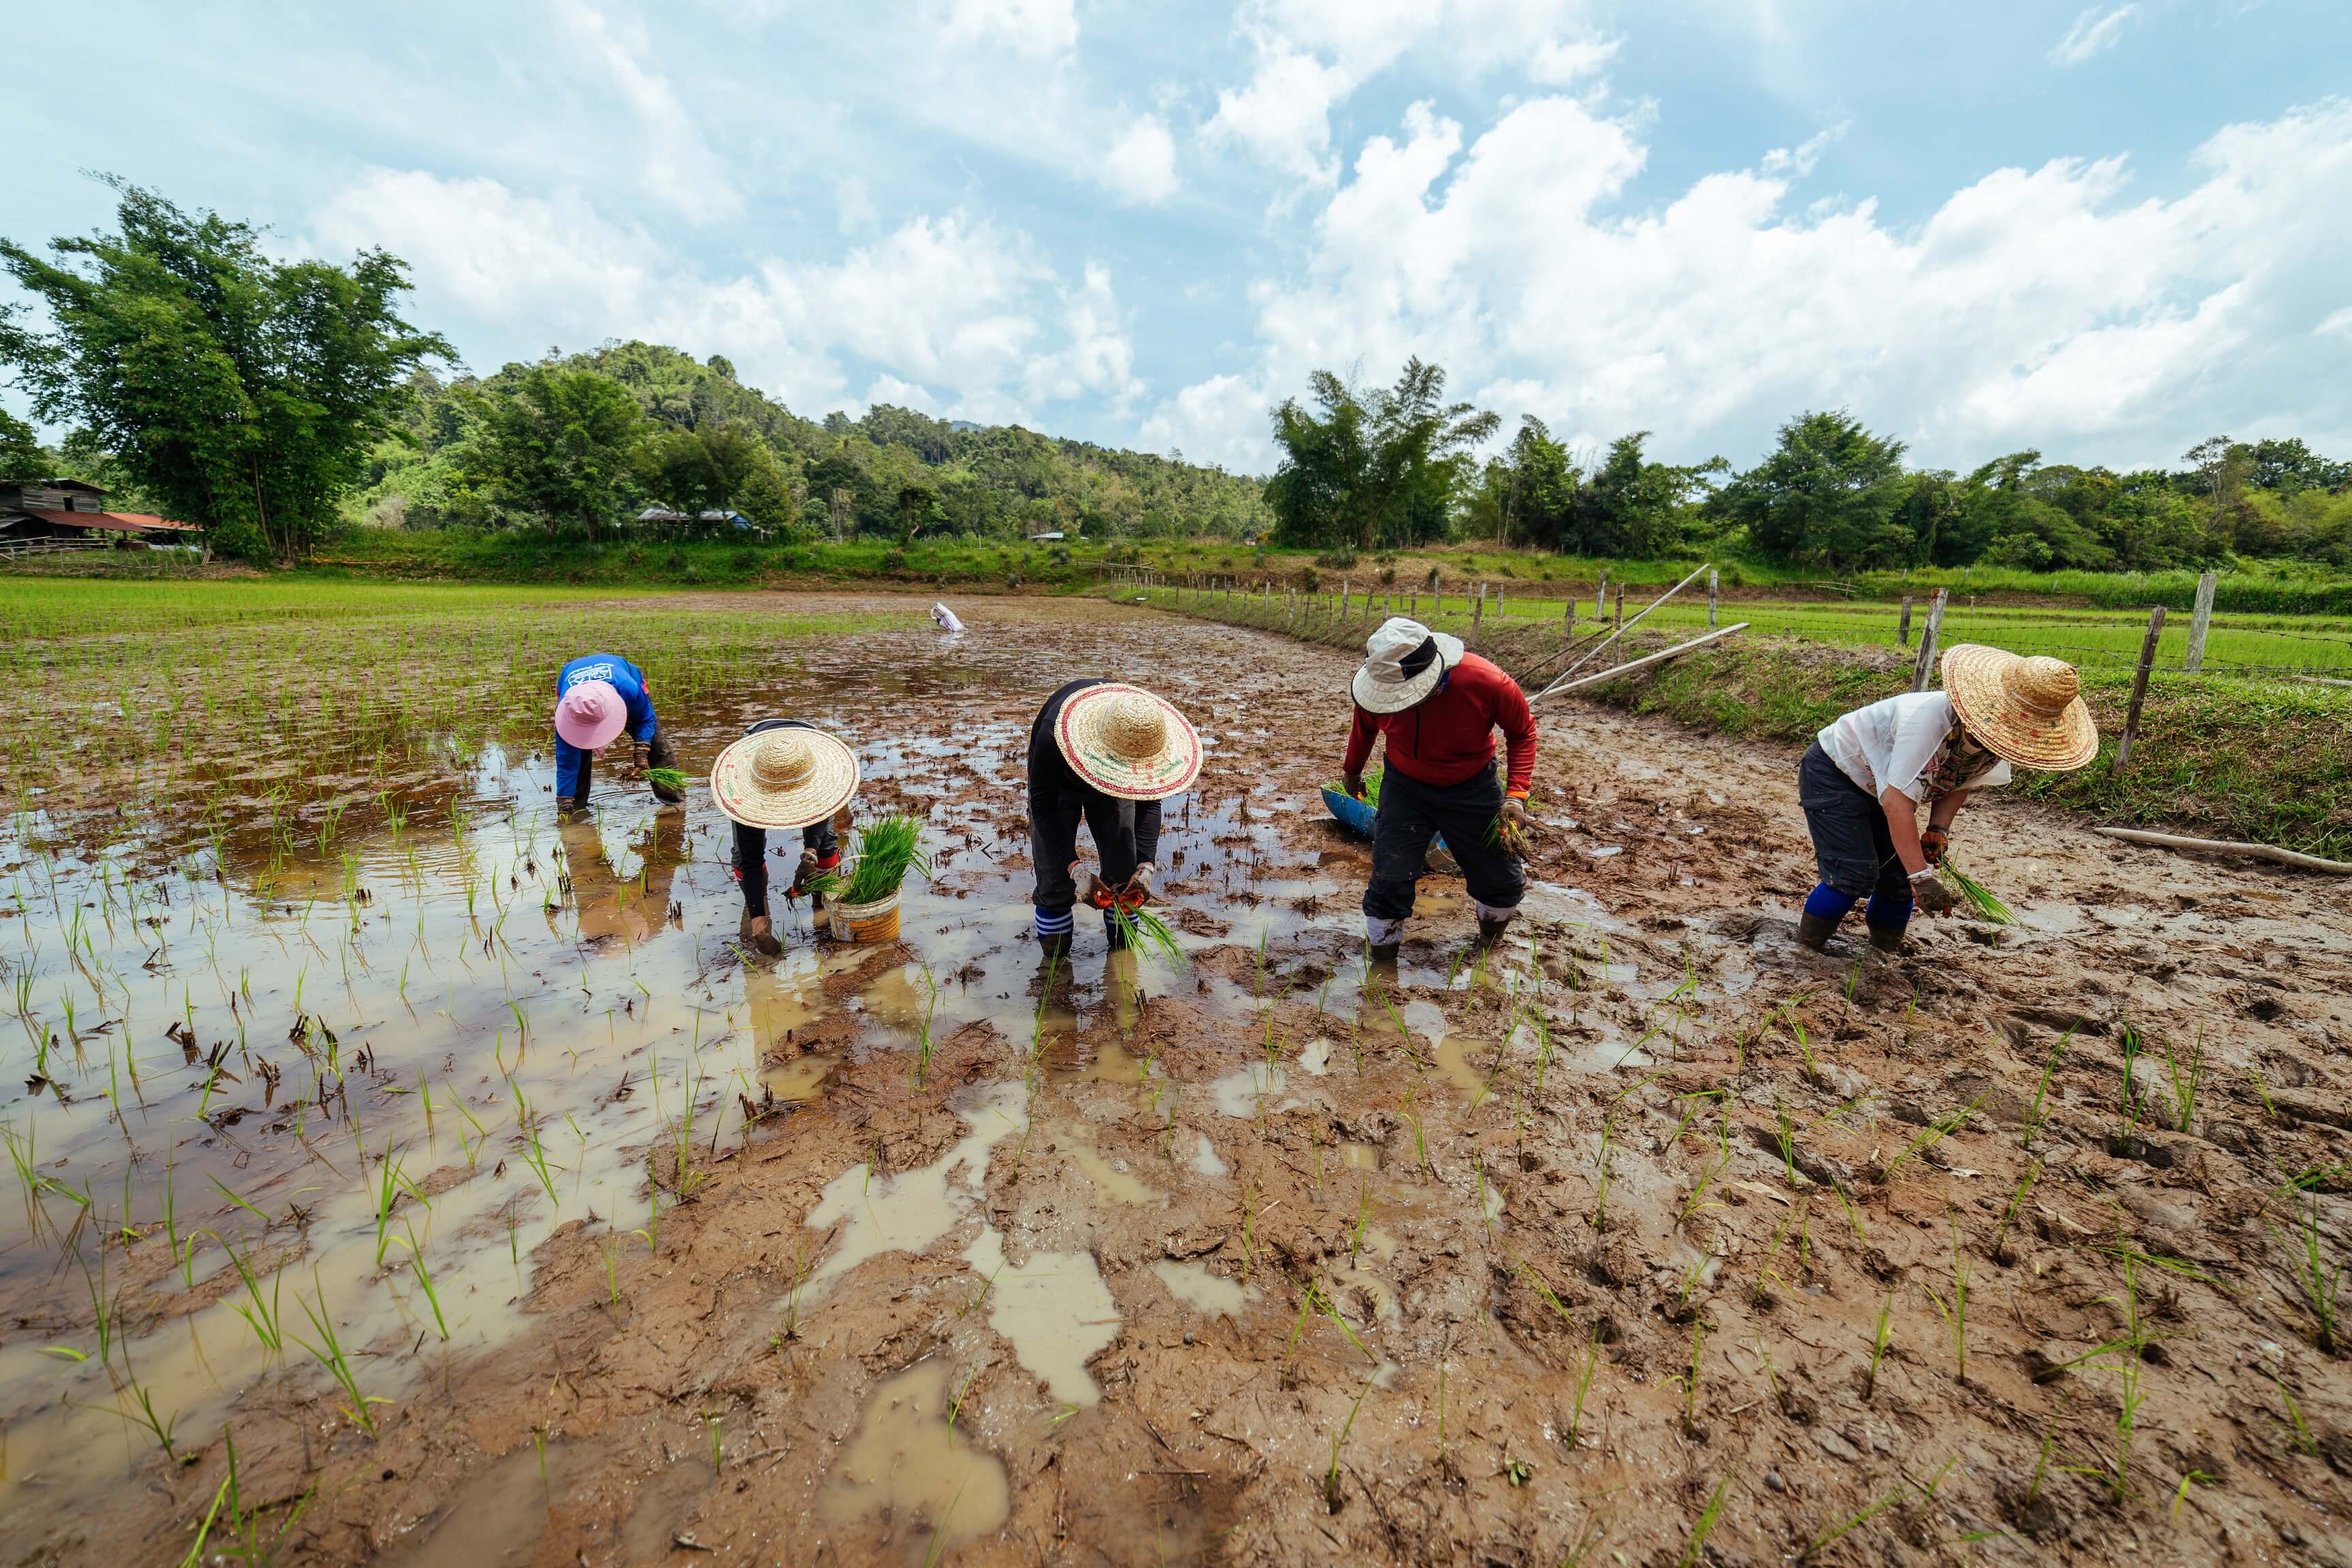 A group of travellers standing in a muddy field in Long Semadoh valley, bent over to plant rice.